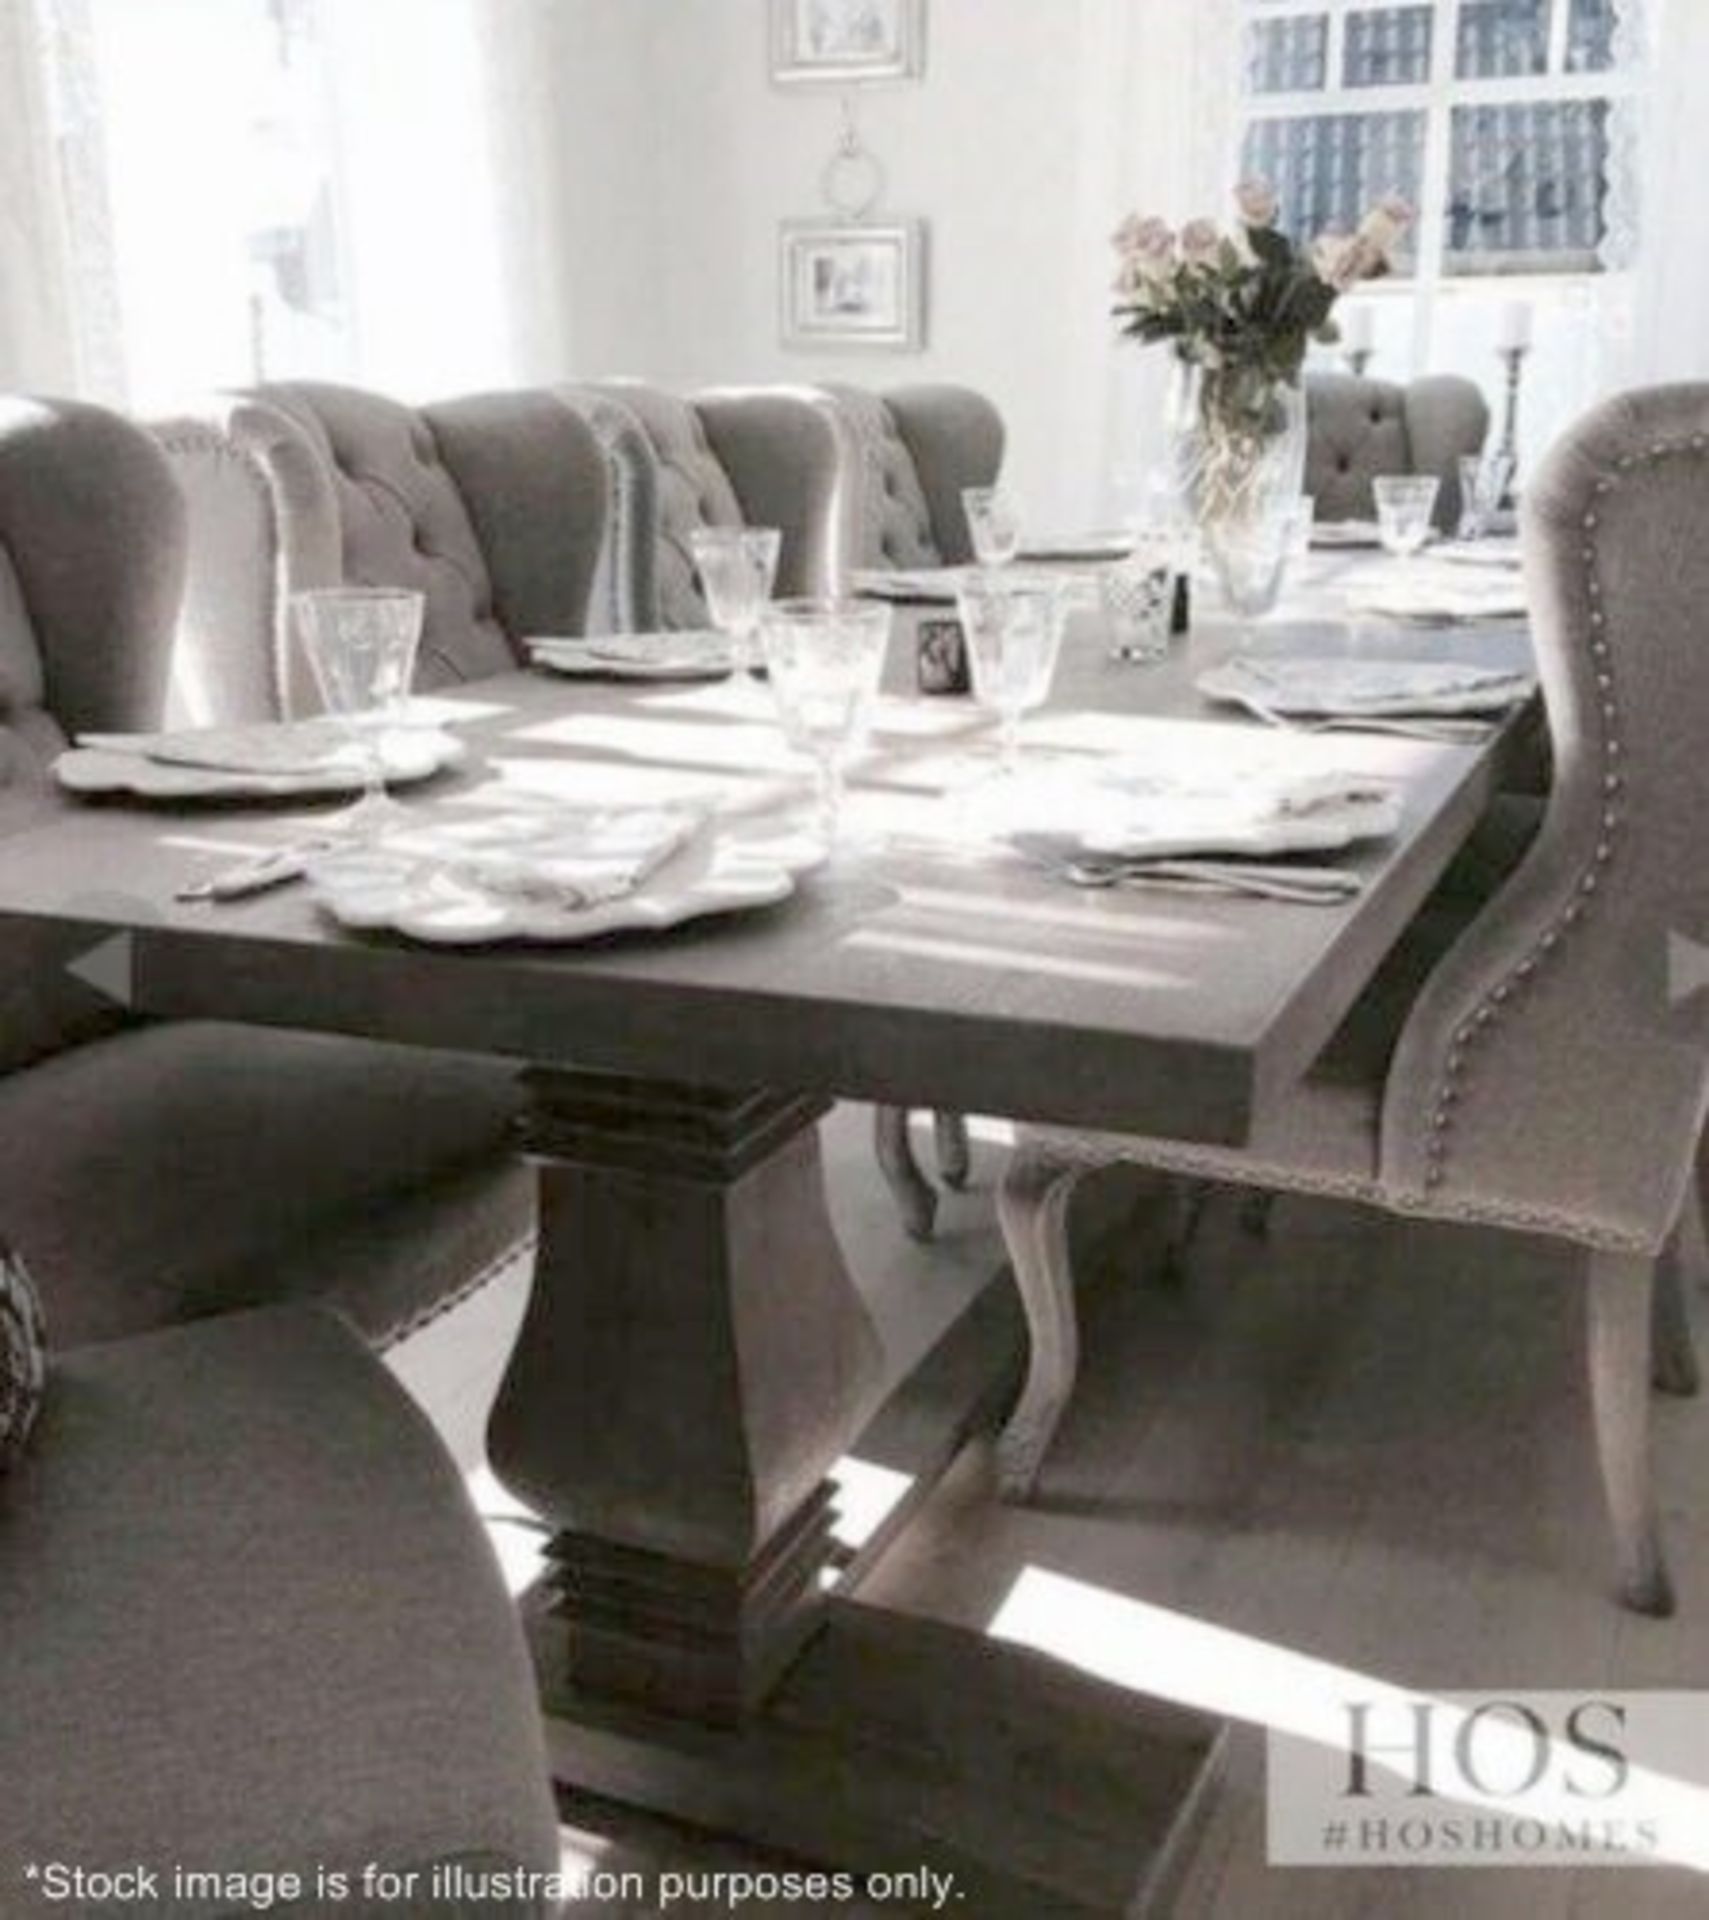 1 x HOUSE OF SPARKLES 'Sussex' Large Wooden Dining Table In A Limewash Oak Finish - Brand New Stock - Image 11 of 11